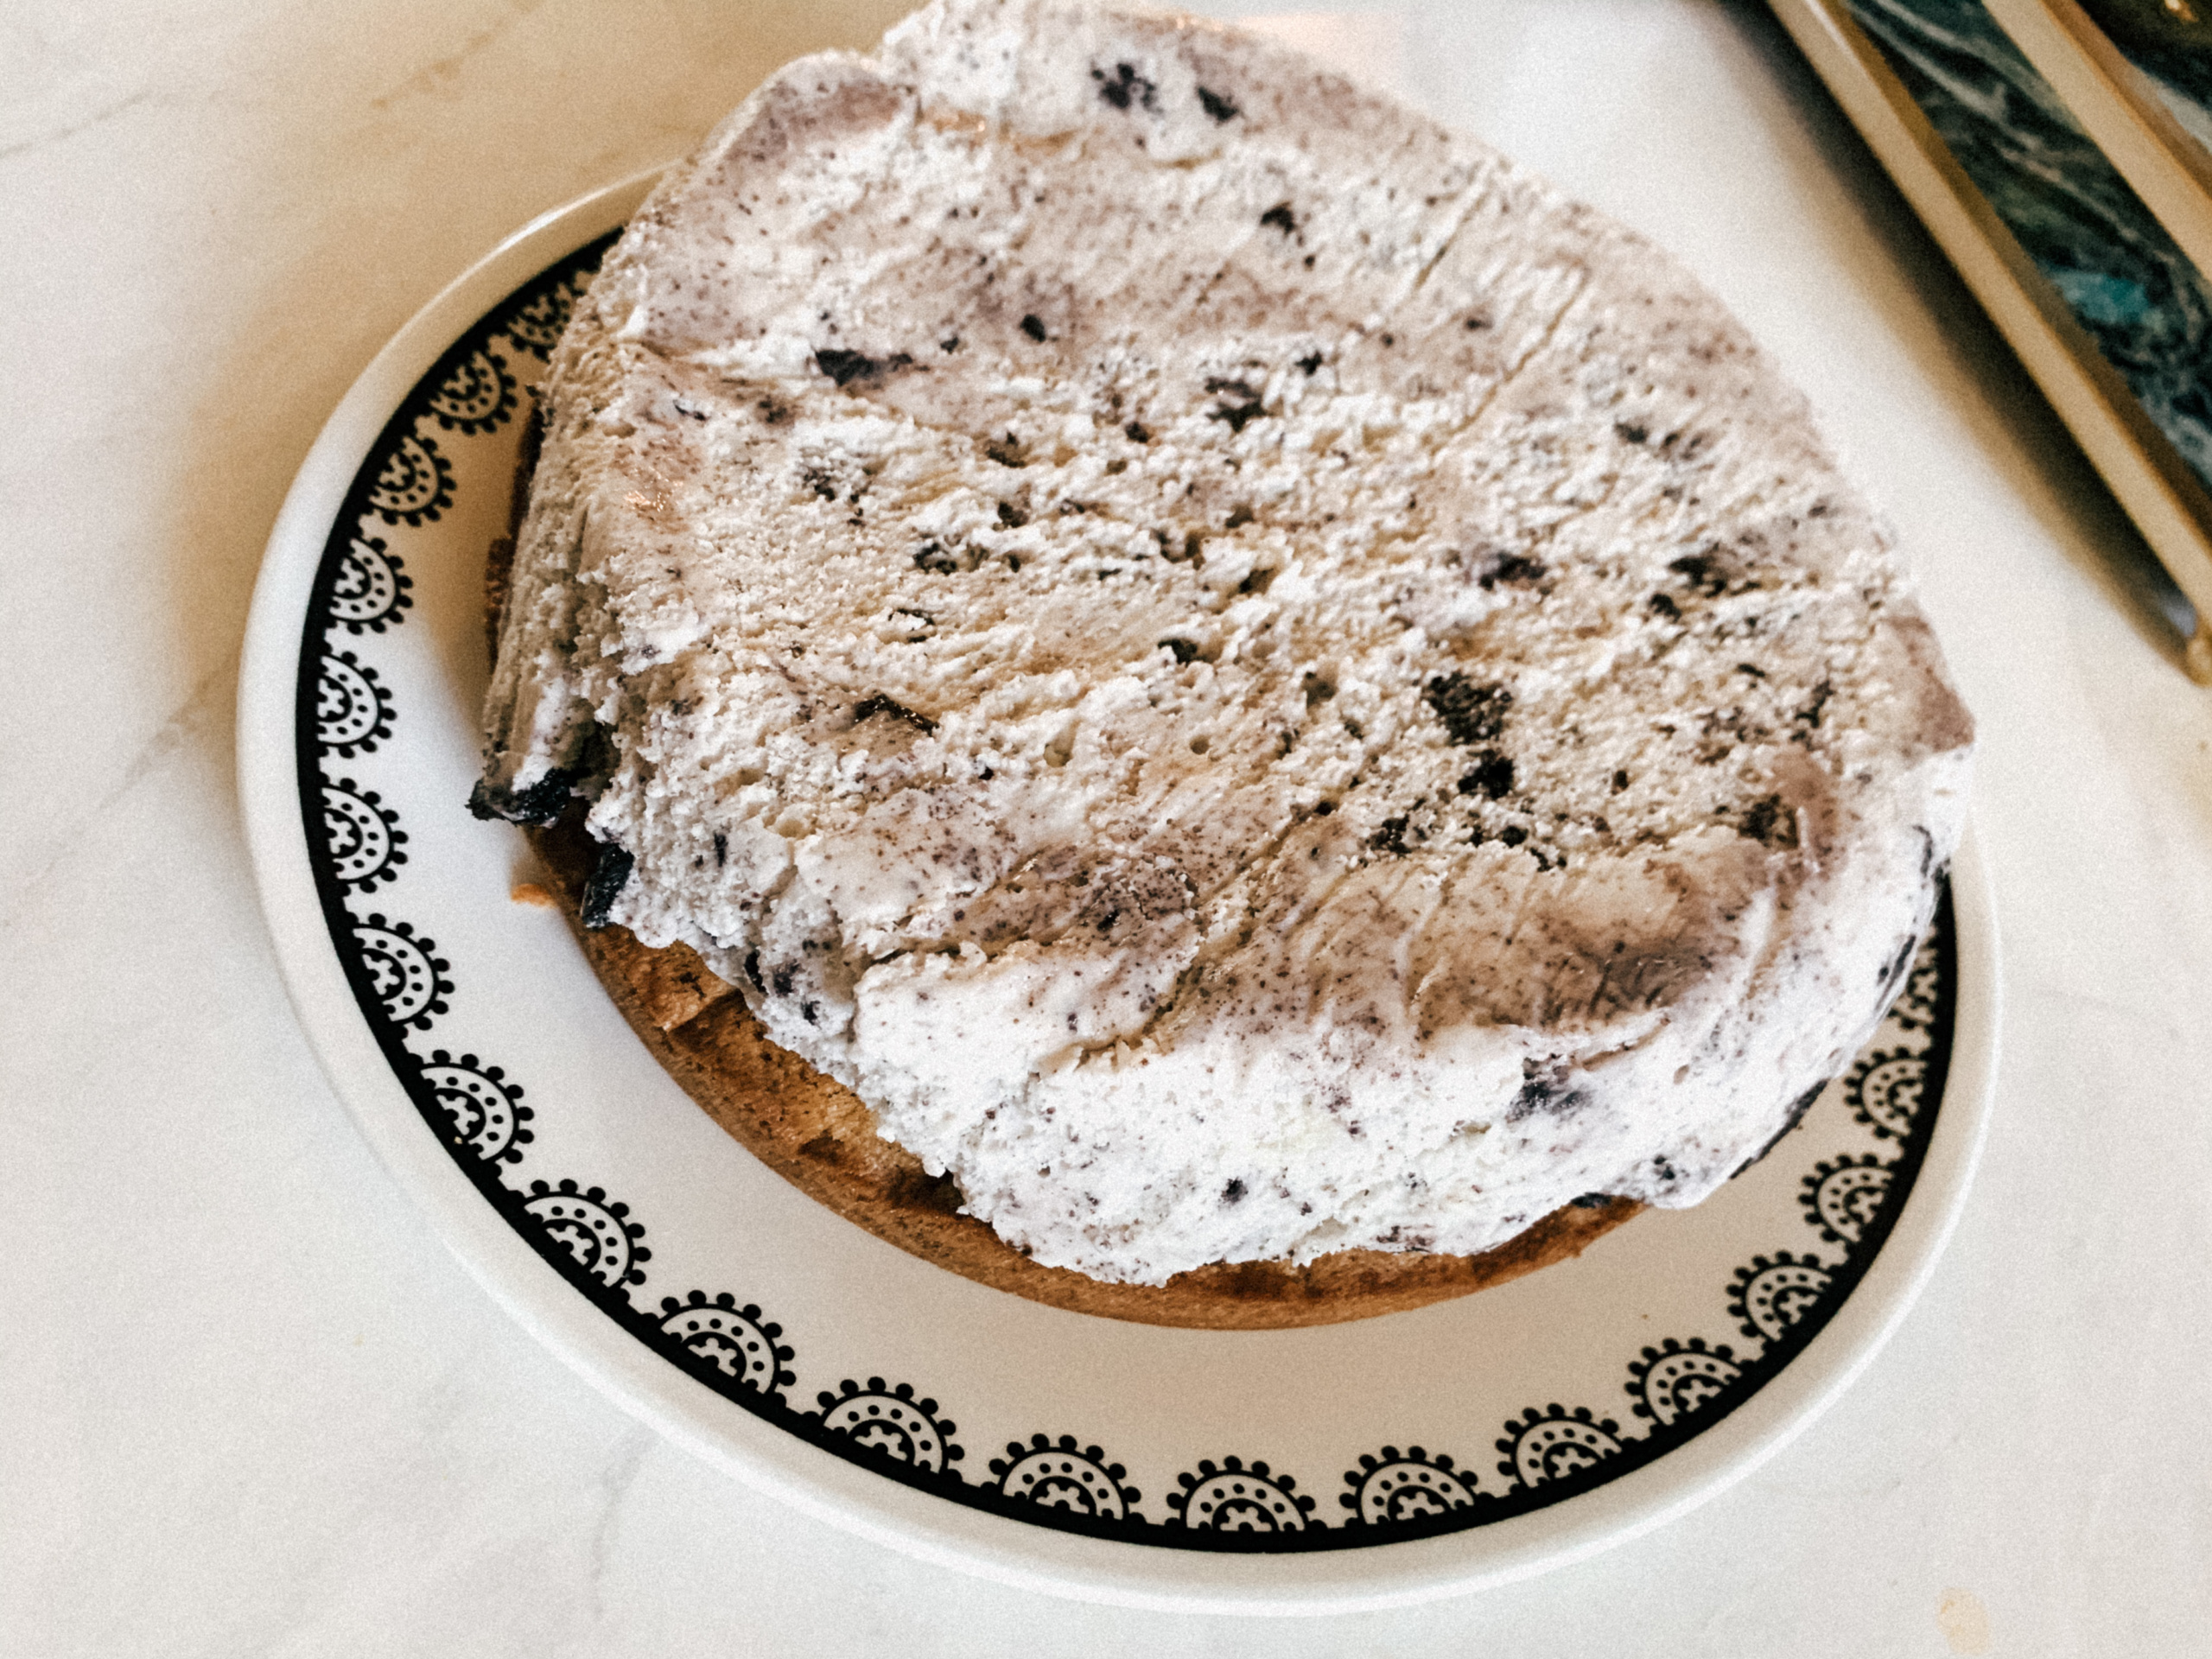 Assembled Cake Easy and Delicious Cookie Ice Cream Cake Recipe #recipe #food #foodie #dessert #birthdaycake #icecreamcake #cookiecake #cookieicecreamcake #cake #pie #cookiecakerecipe #simplybysimone Simone Piliero